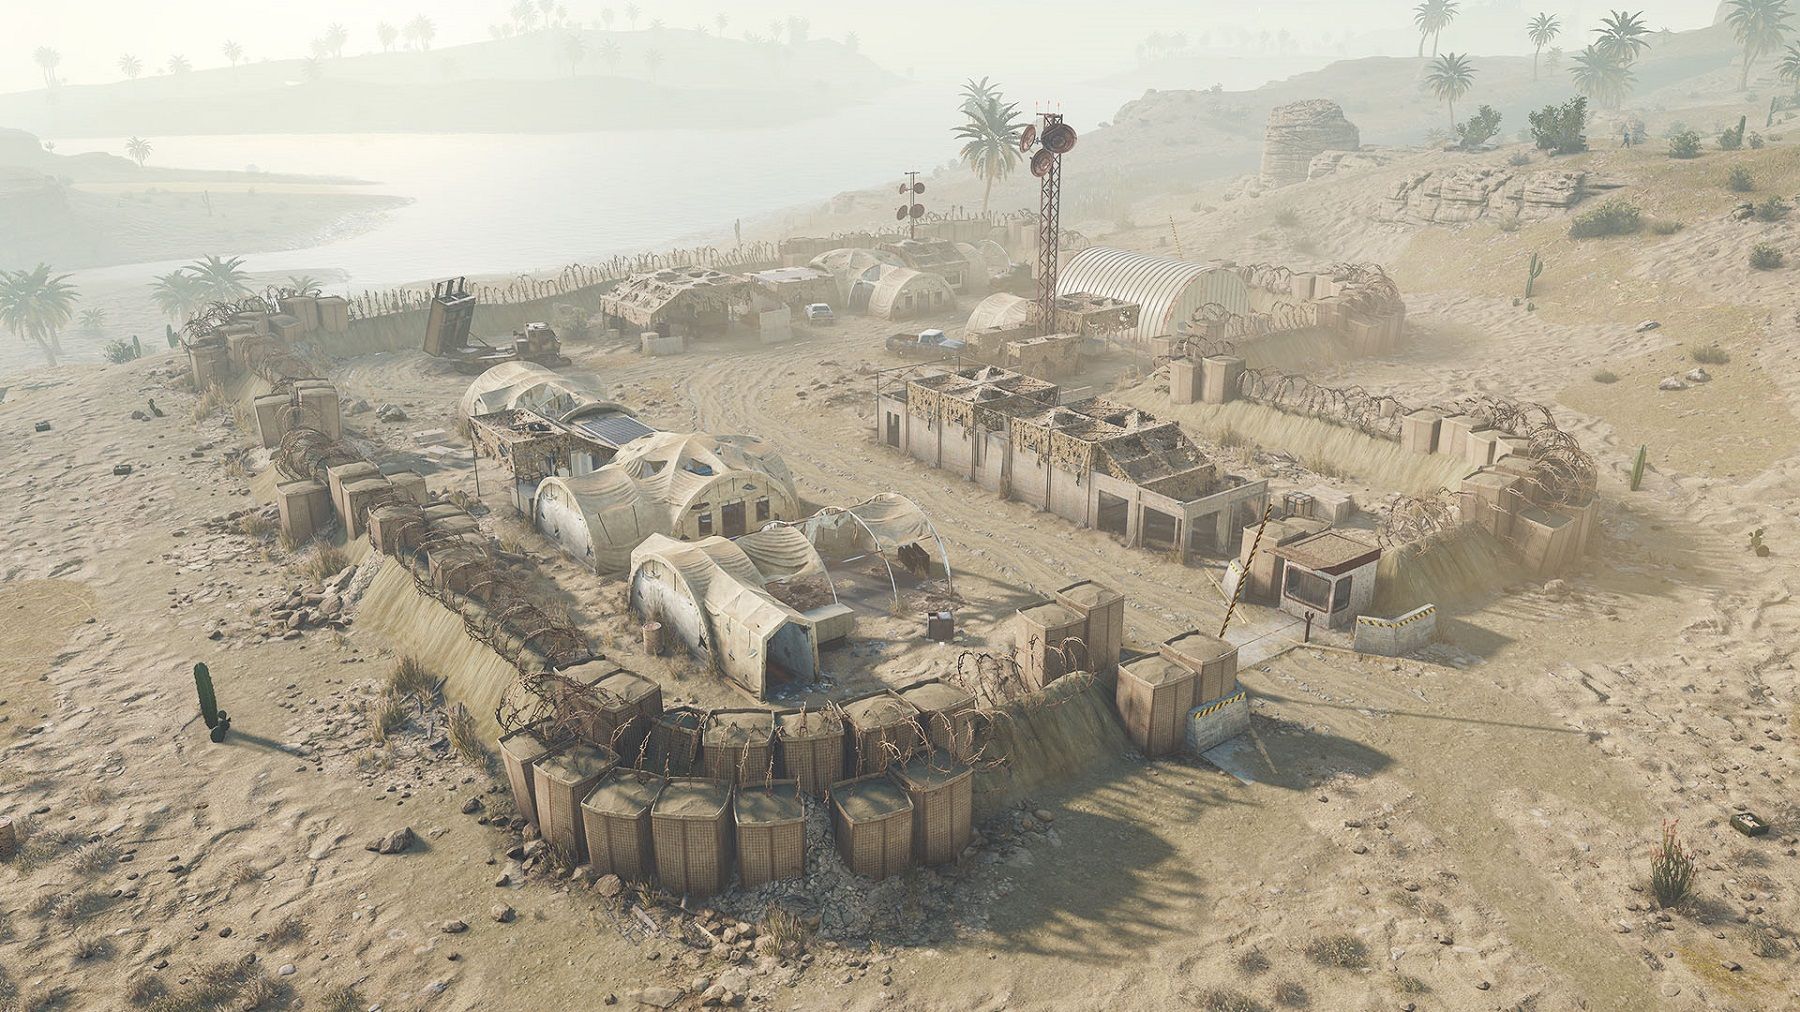 An image from Rust showing one of the desert military bases from the air.